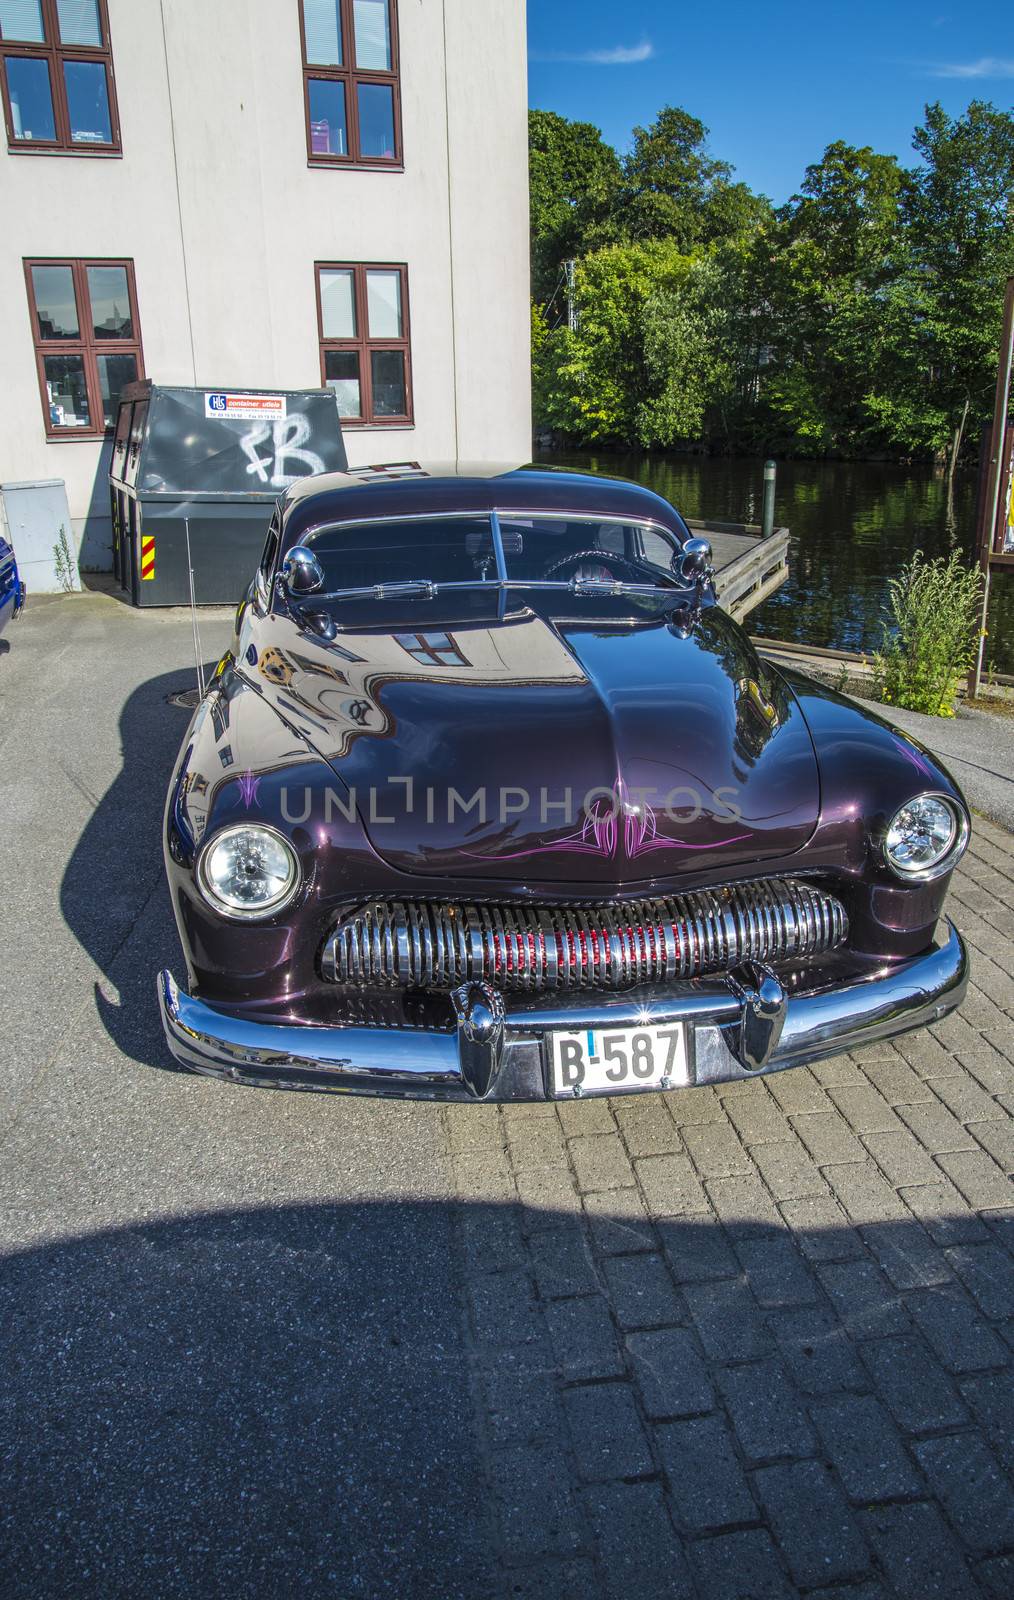 old american car, 1949 mercury coupe custom by steirus